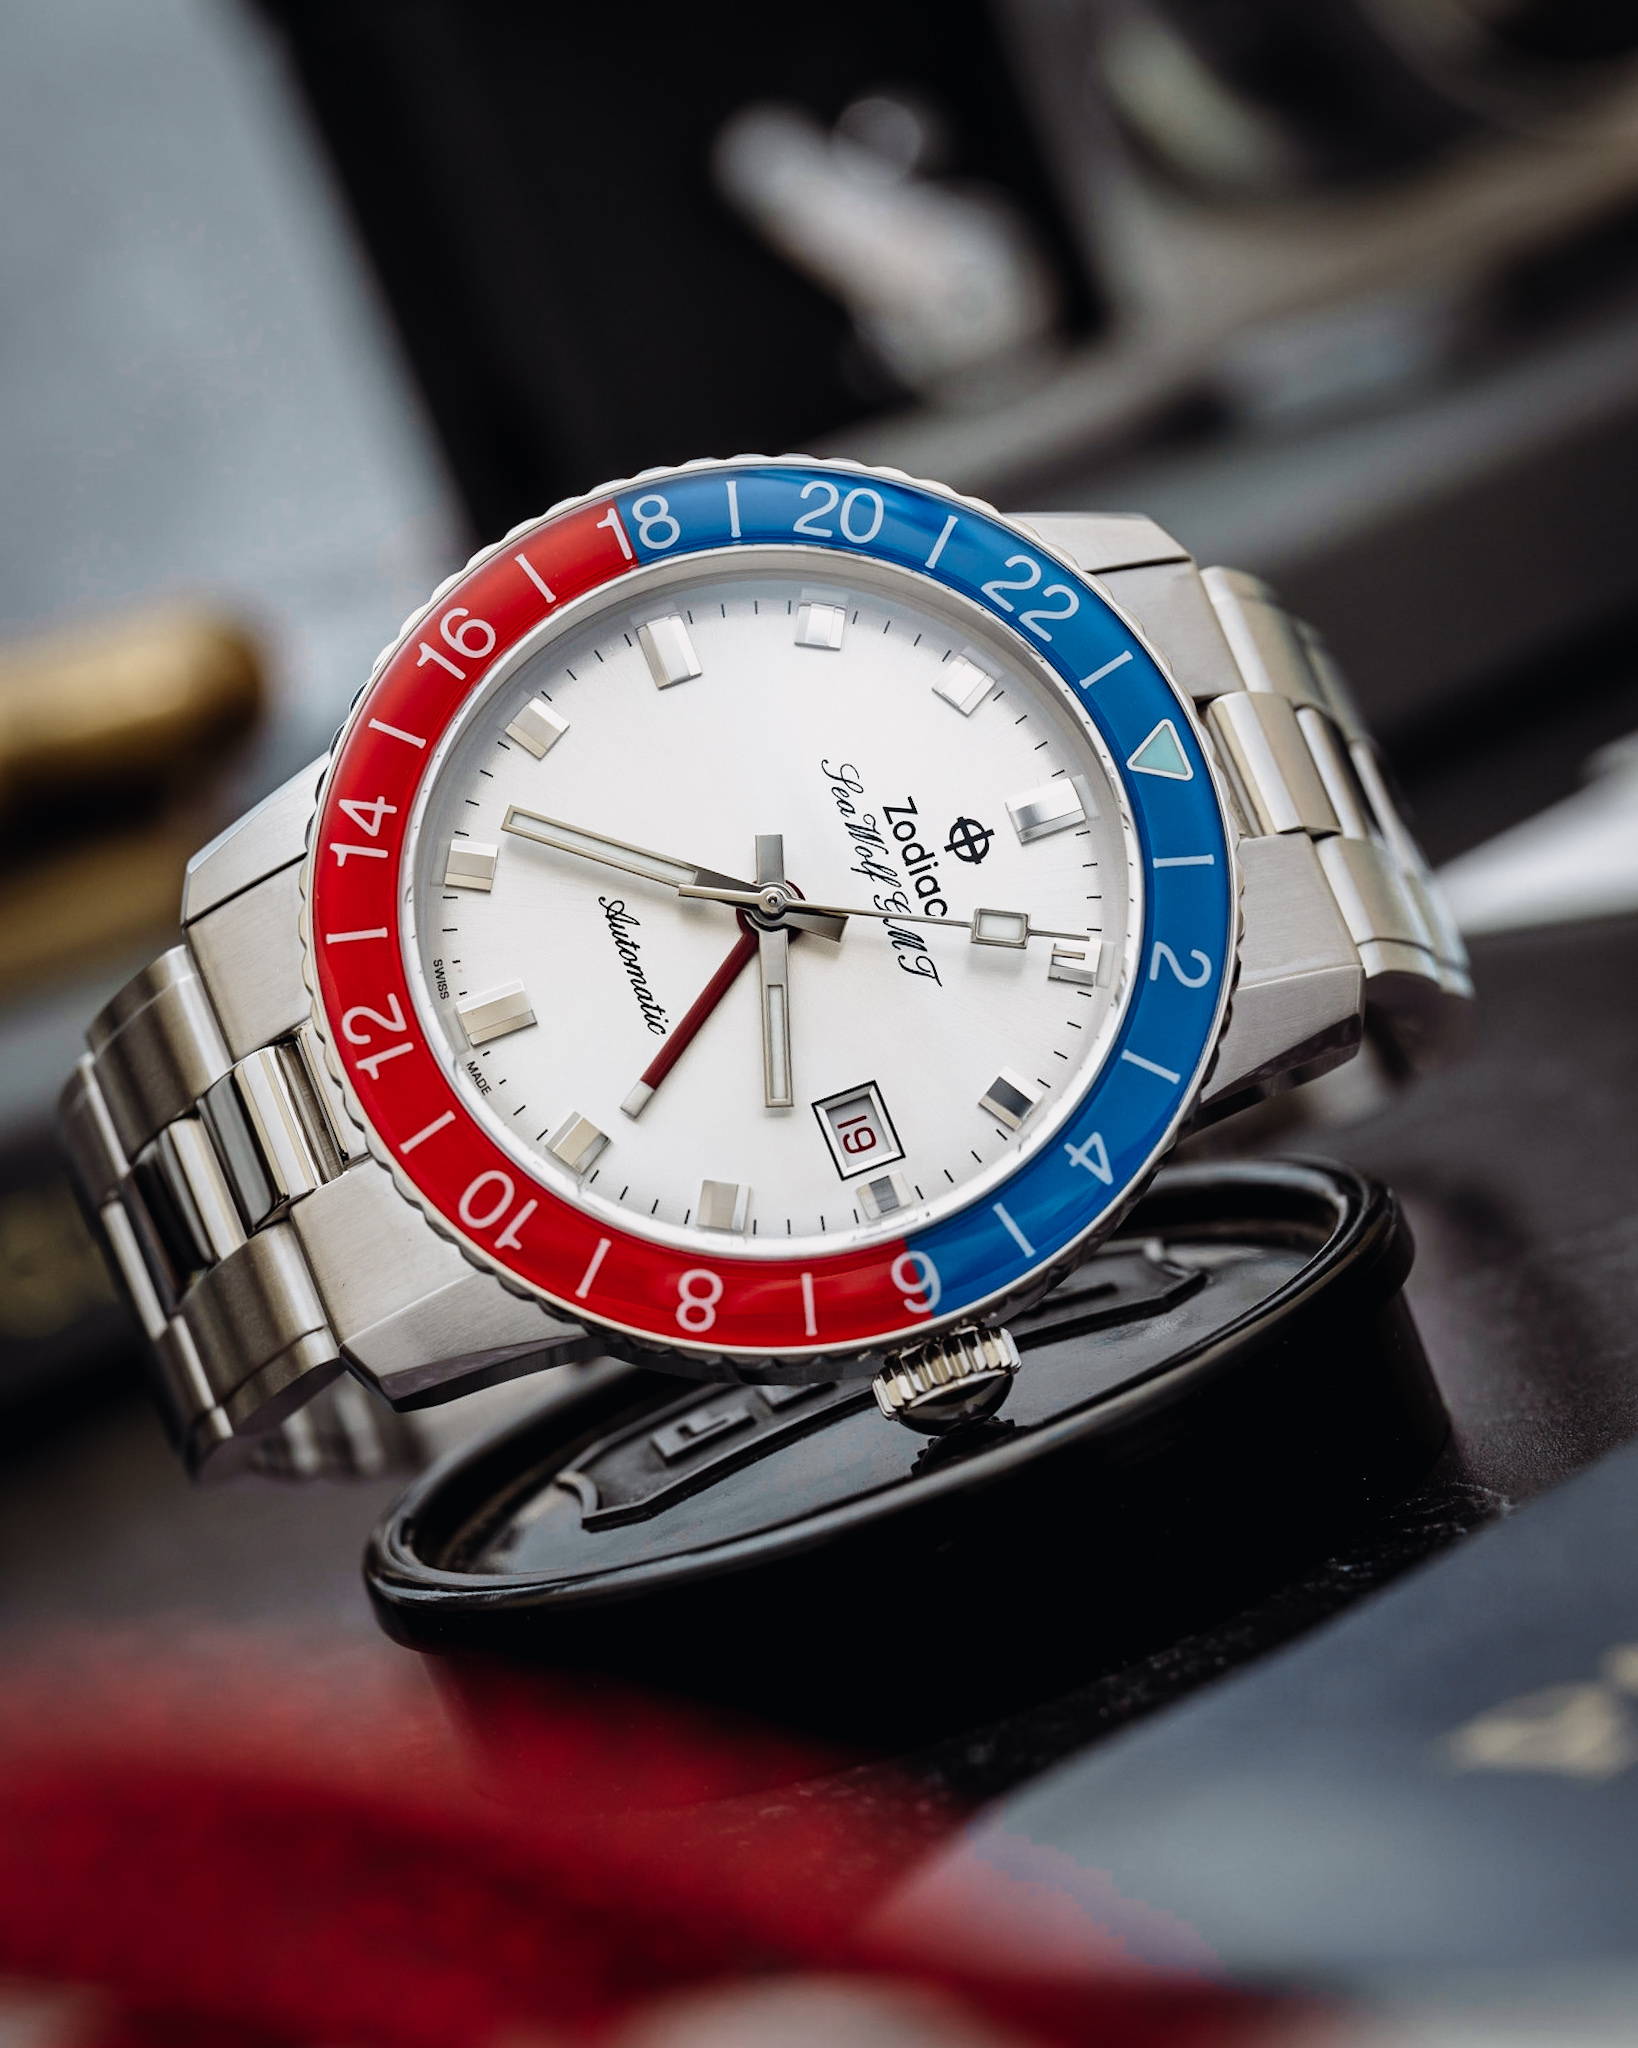 Presenting the Zodiac Sea Wolf GMT 'Crystal' Topper Edition